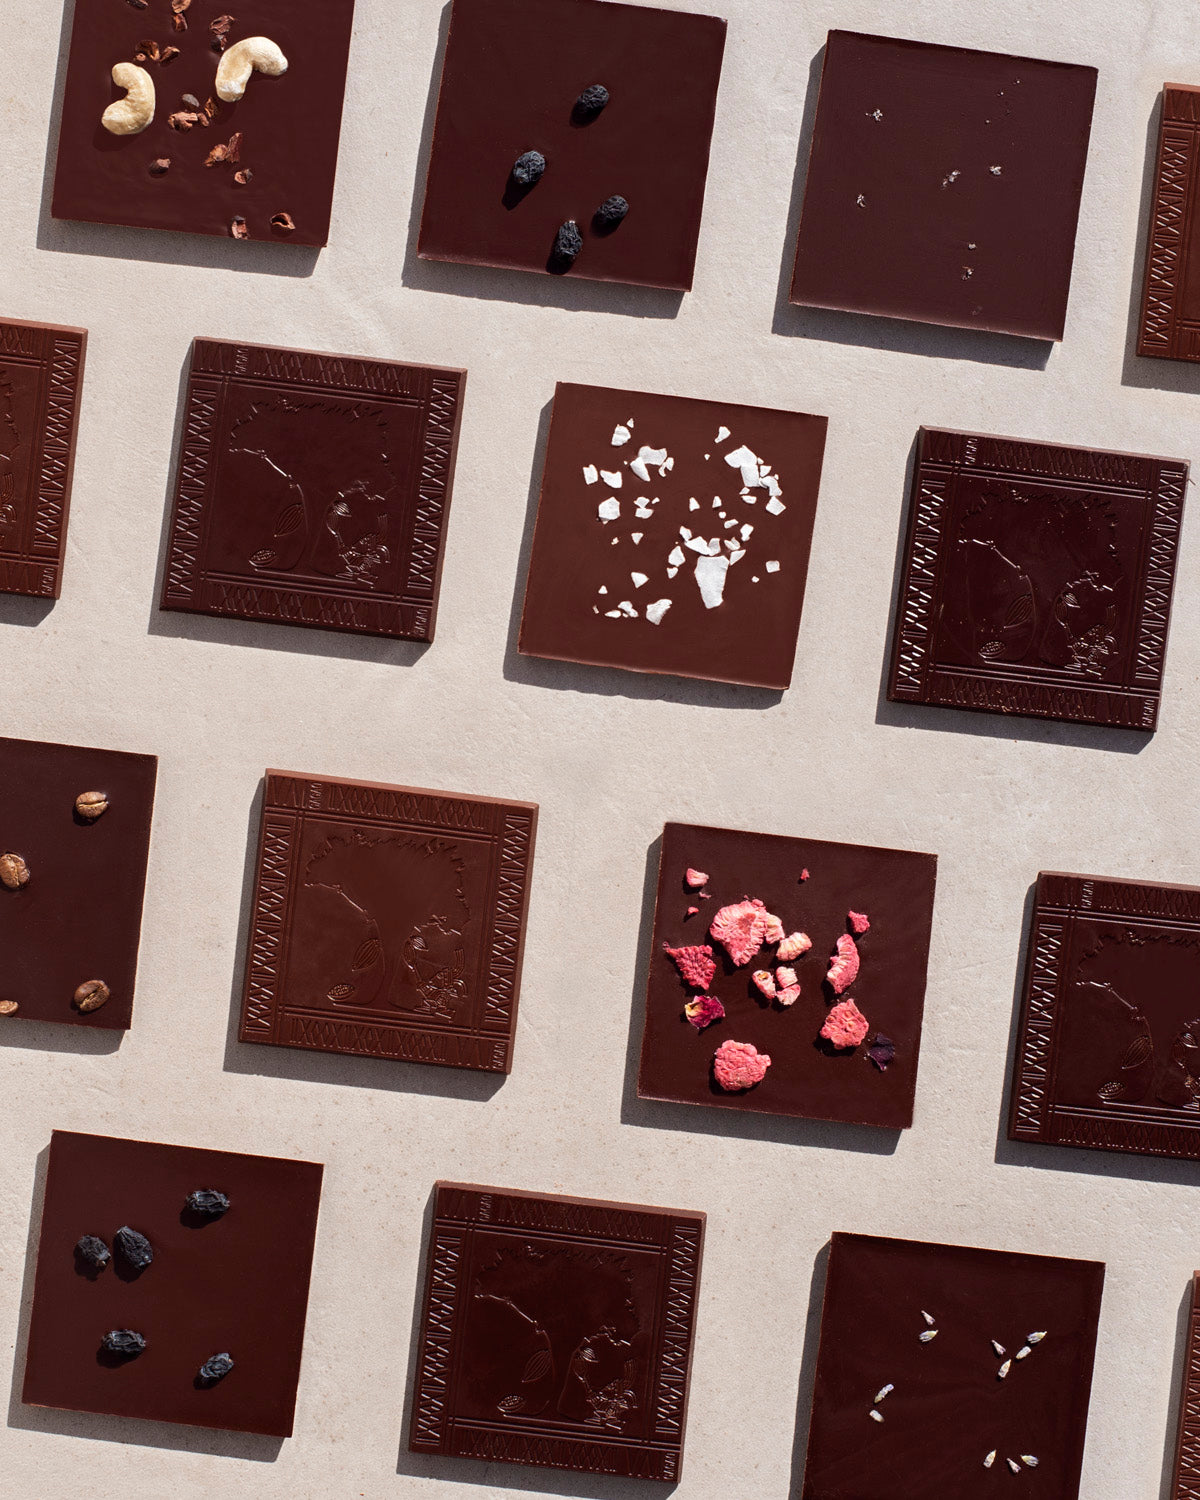 TLALOC Chocolate 80% · Sweetened with Dates + Myrtle Berries